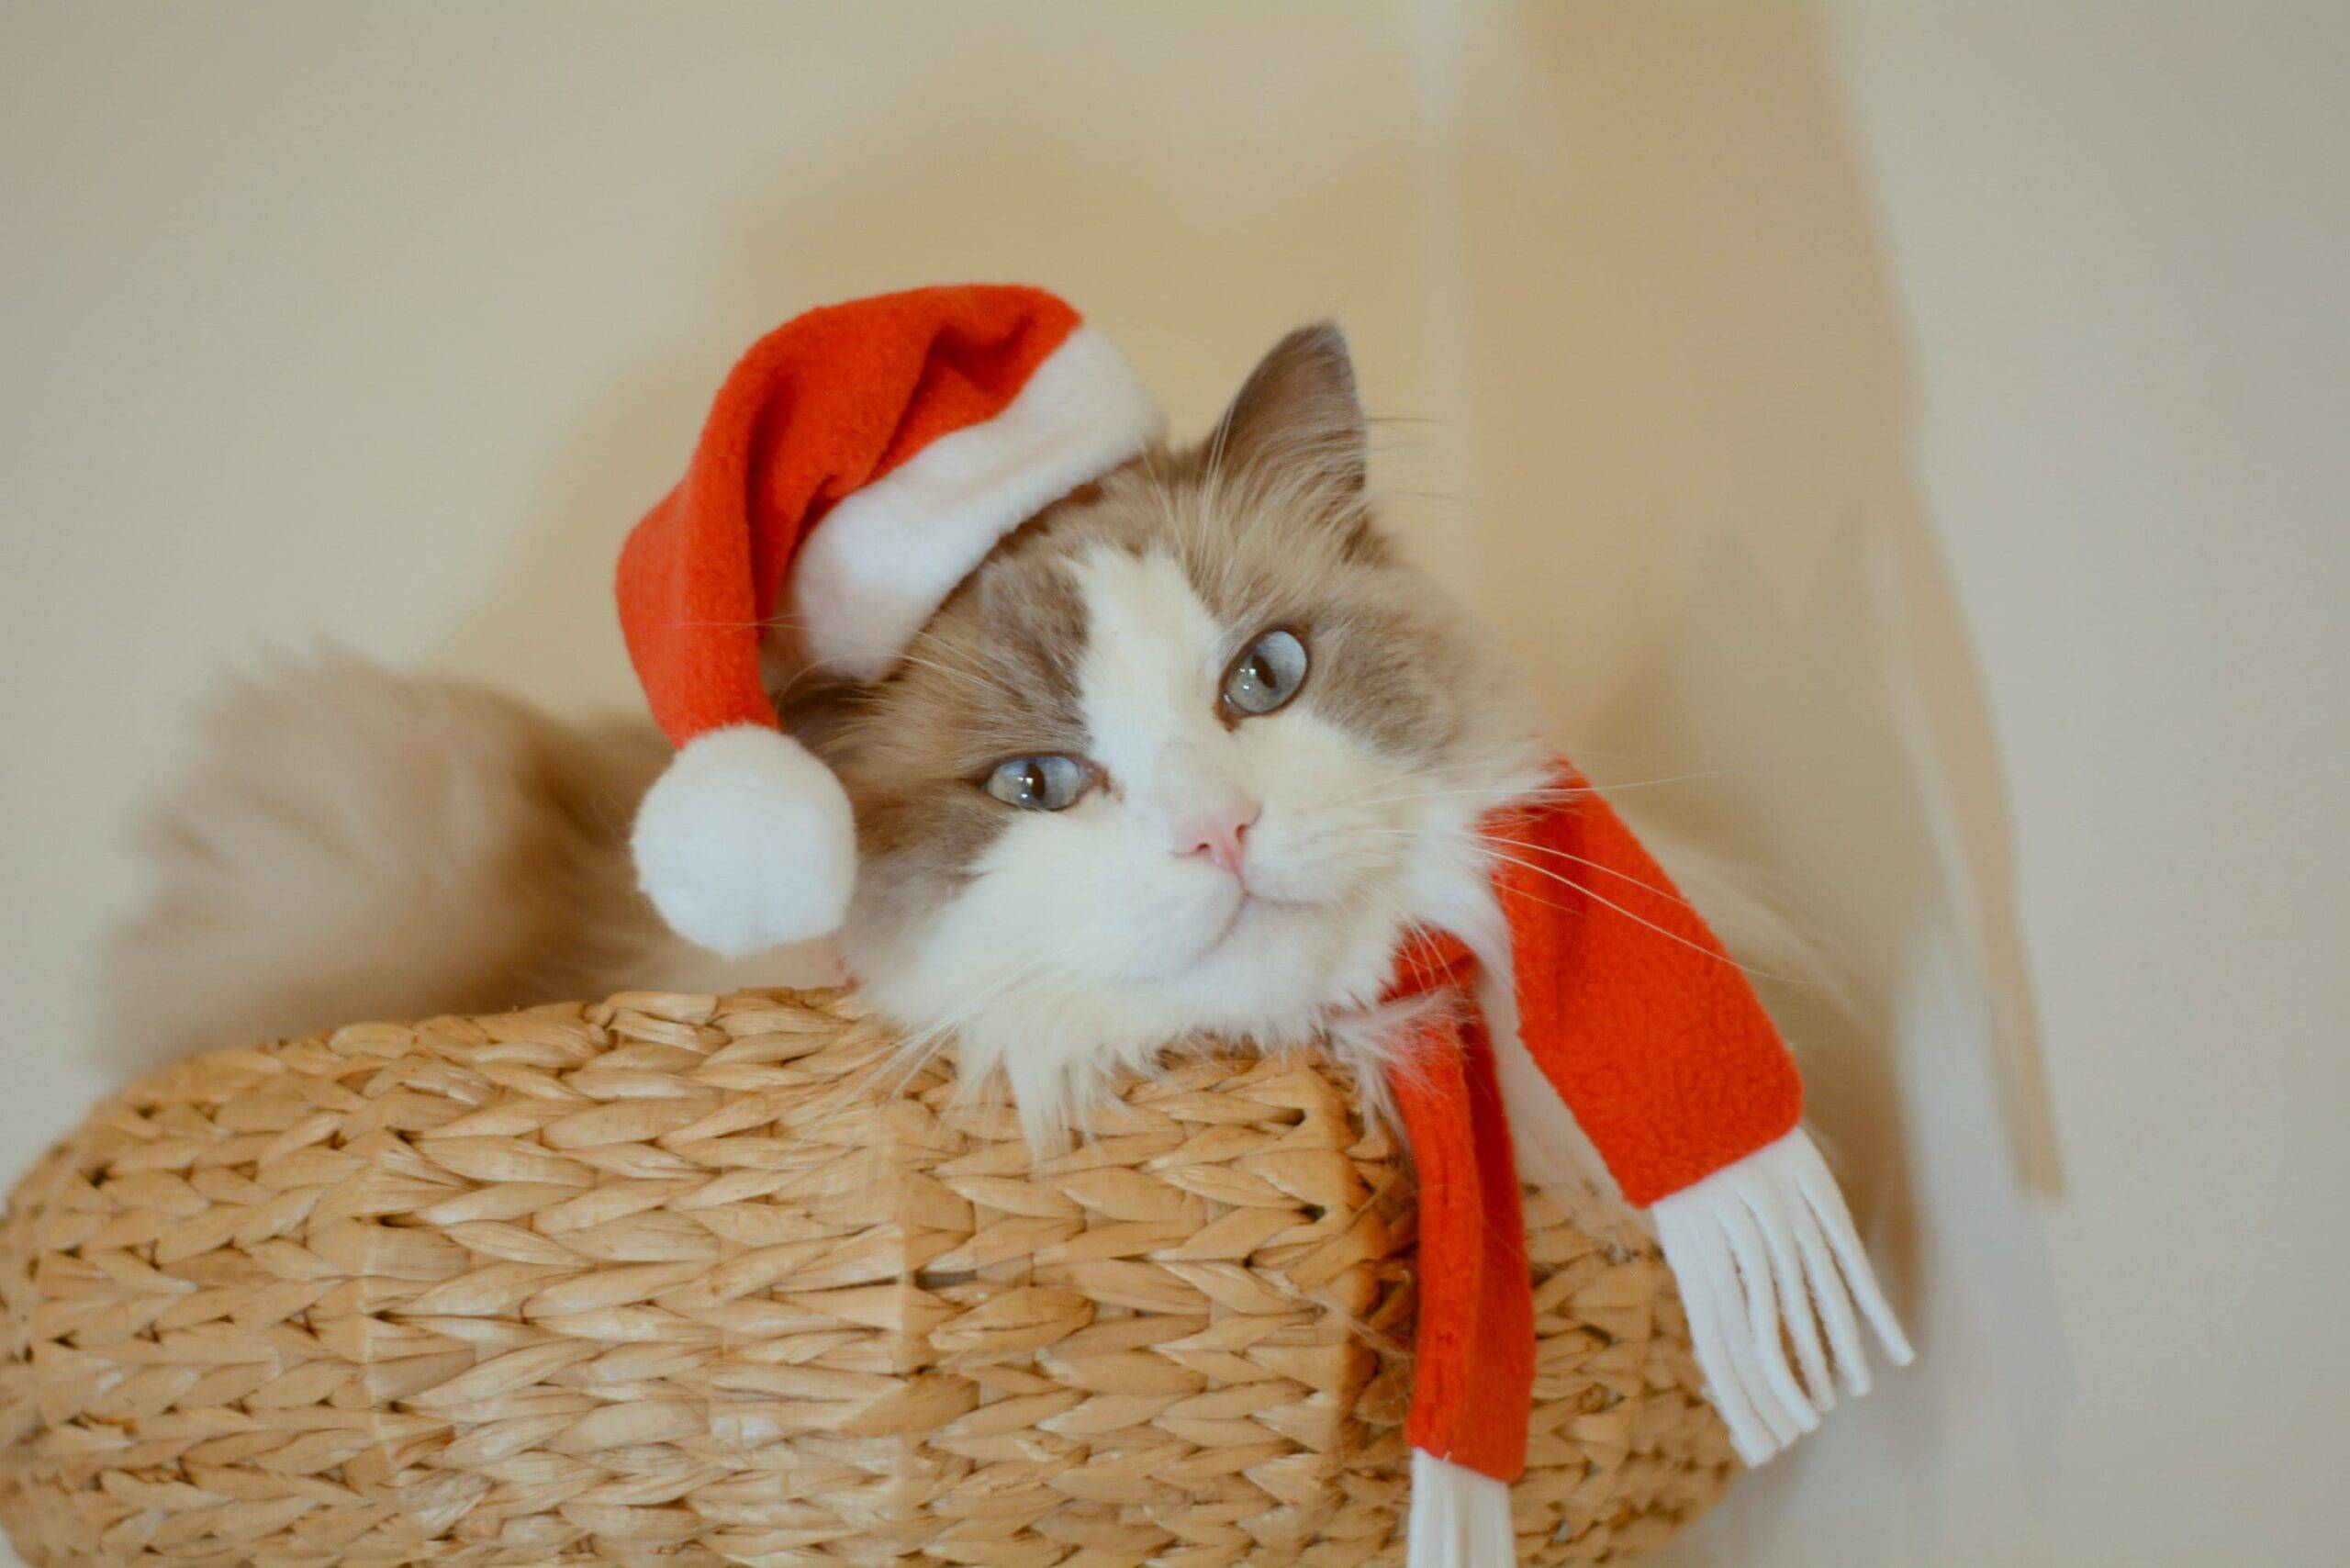 Christmas Hat + Scarf + Toy / Christmas gift packages, hats for cats, costumes for cat and dog / Crafts4Cats